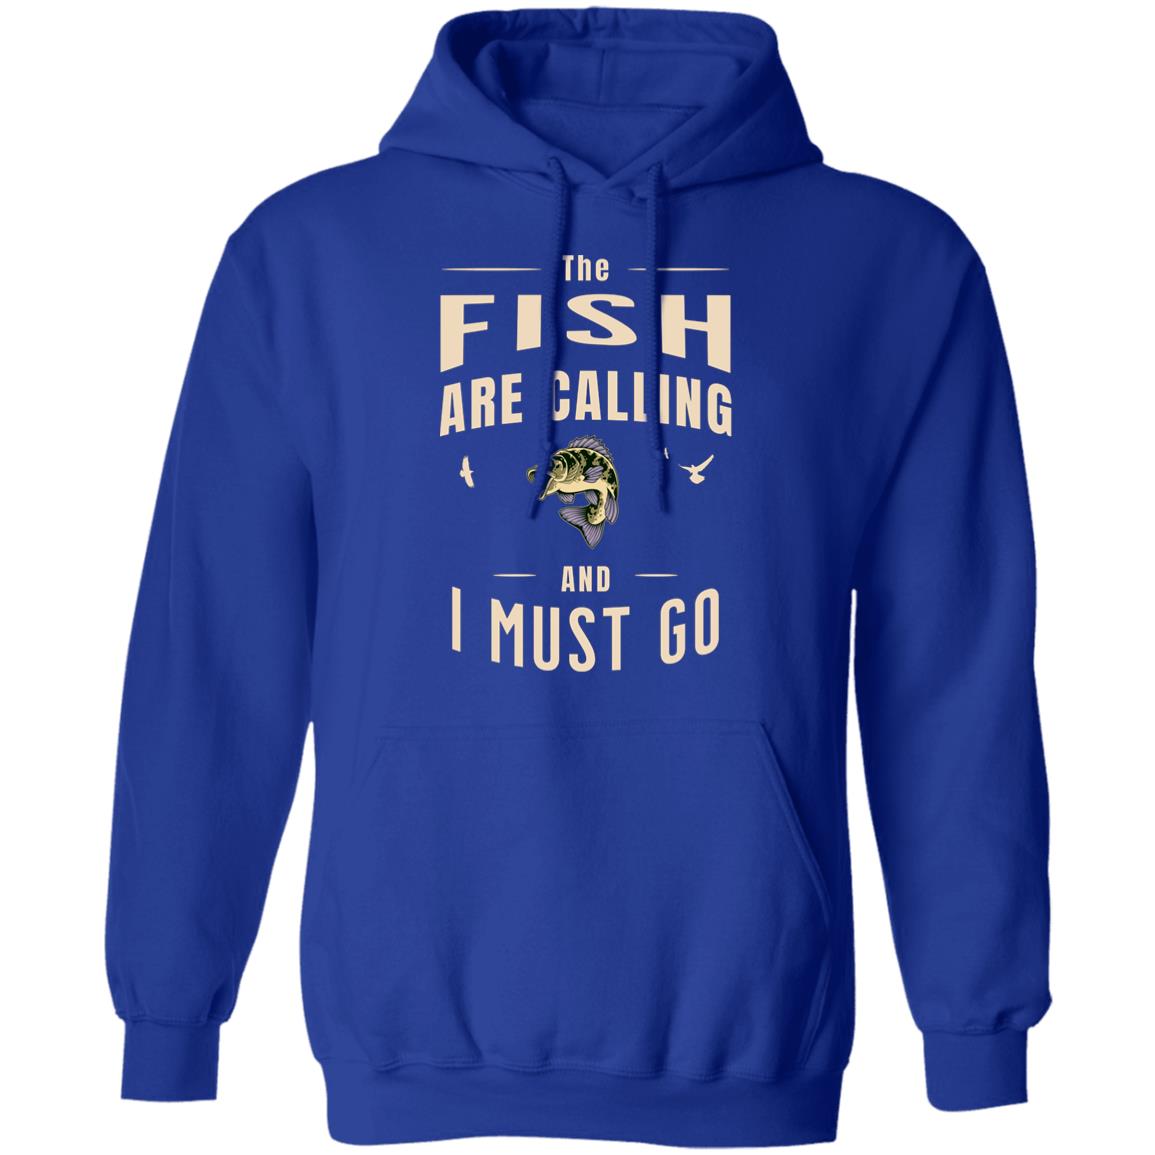 The fish are calling and i must go-hoodie k royal